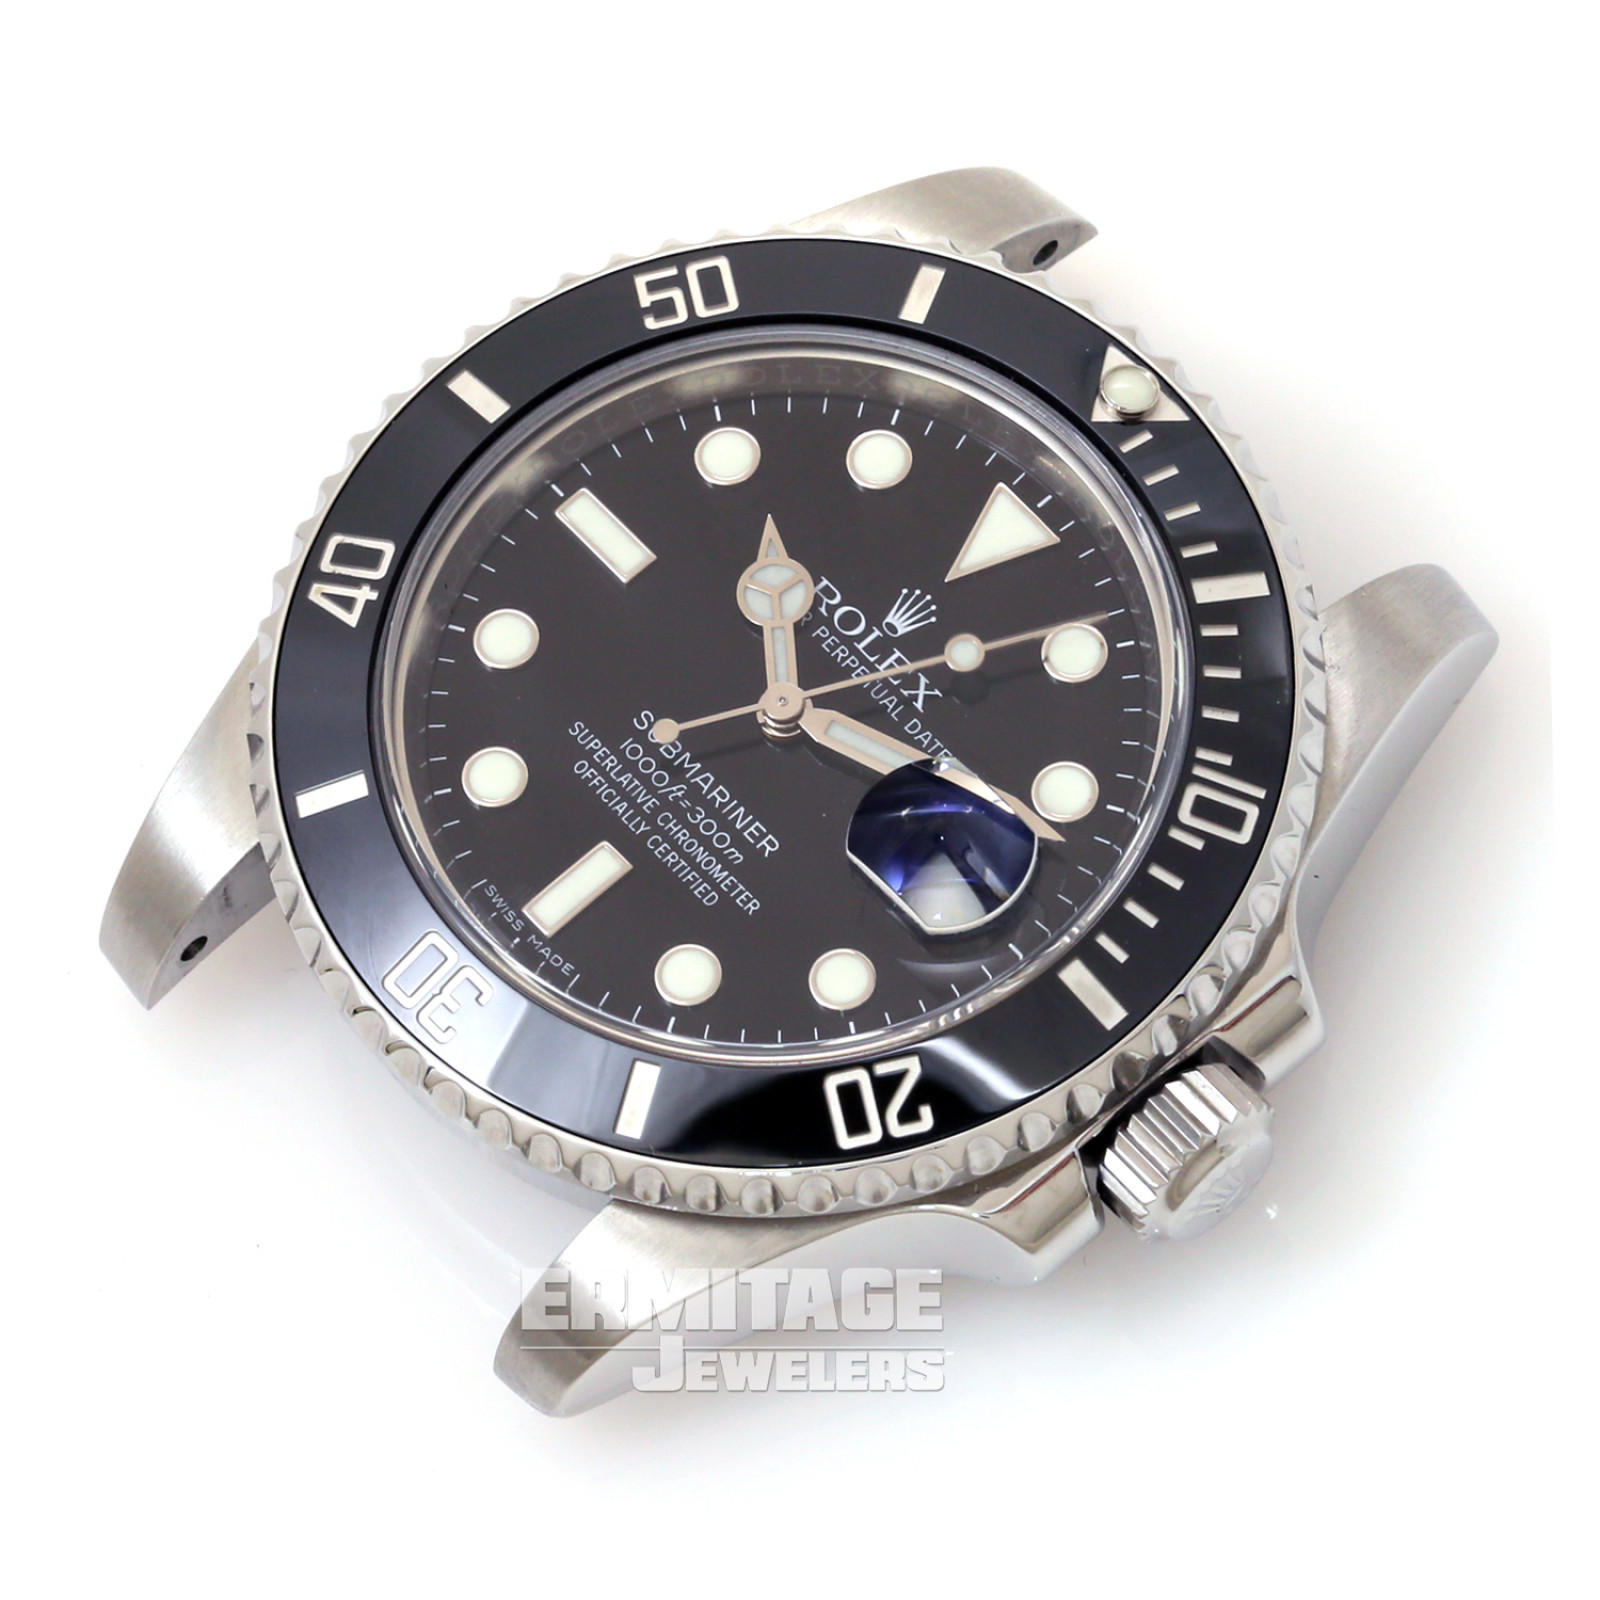 40 mm Rolex Submariner 116610 Steel on Oyster Pre-Owned